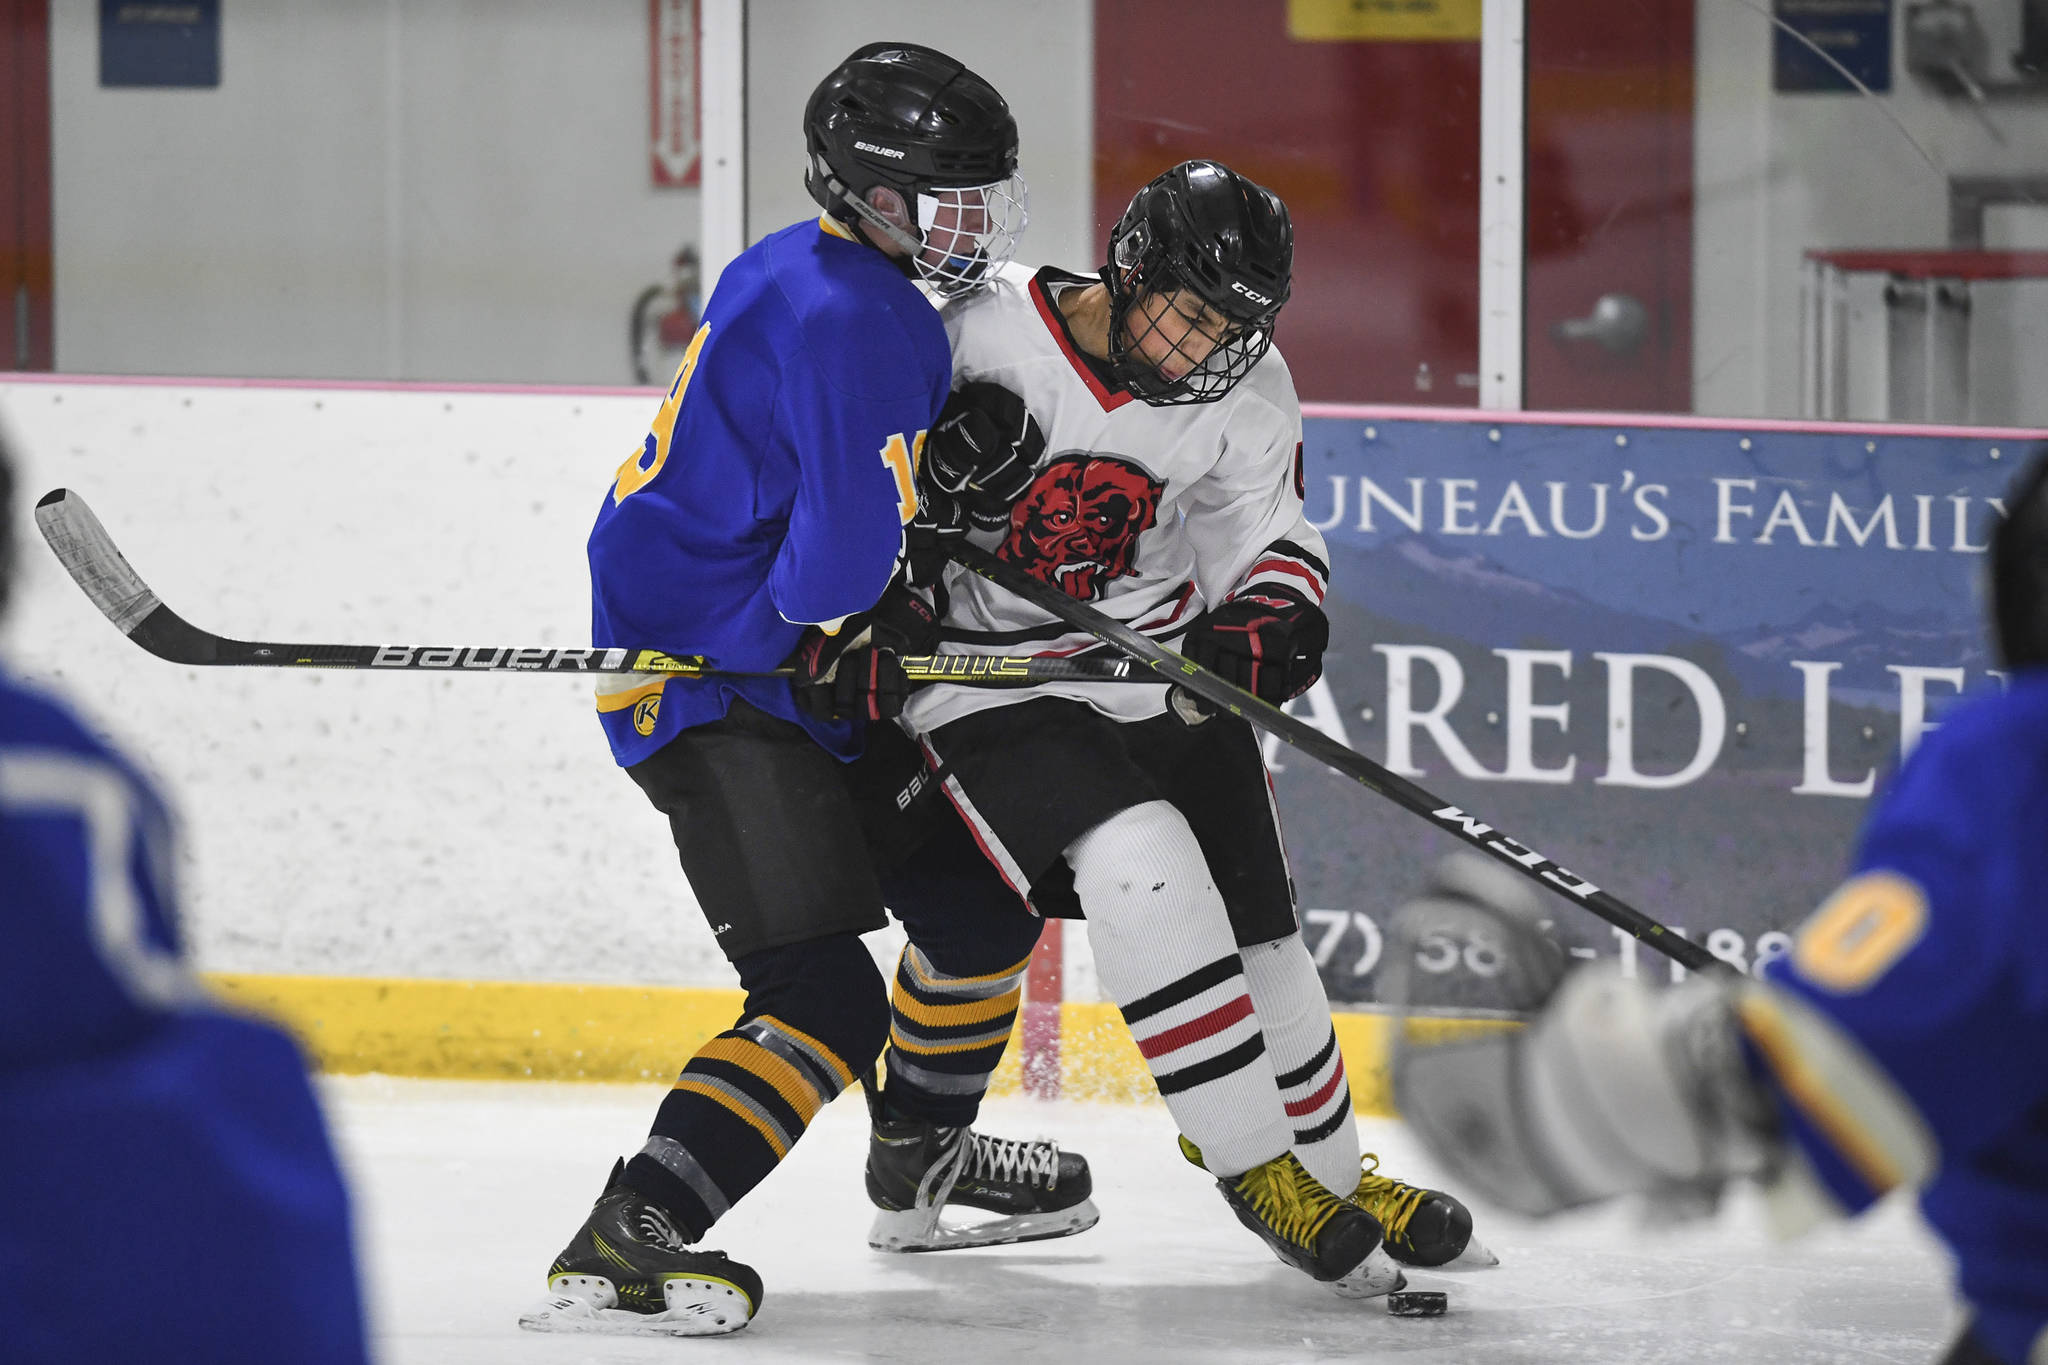 Juneau-Douglas’ Andre Peirovi, right, gets tied up against Monroe’s Dom Coiley in the second period at the Treadwell Arena on Friday, Nov. 15, 2019. JDHS won 13-0. (Michael Penn | Juneau Empire)